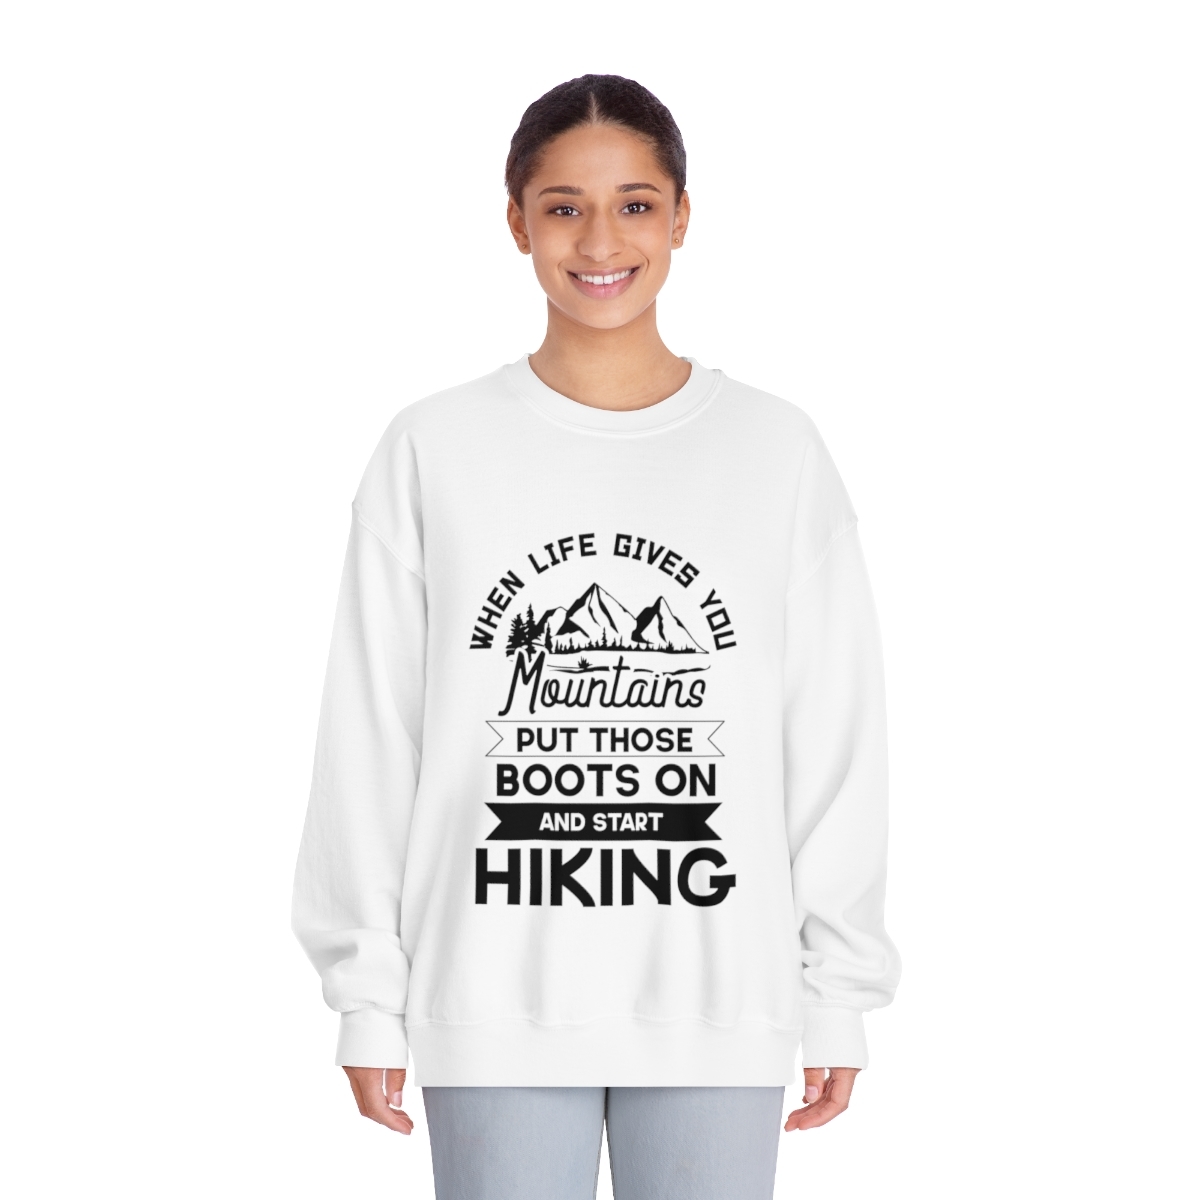 Primary image for Unisex DryBlend® Crewneck Sweatshirt - Hike and Conquer Mountains